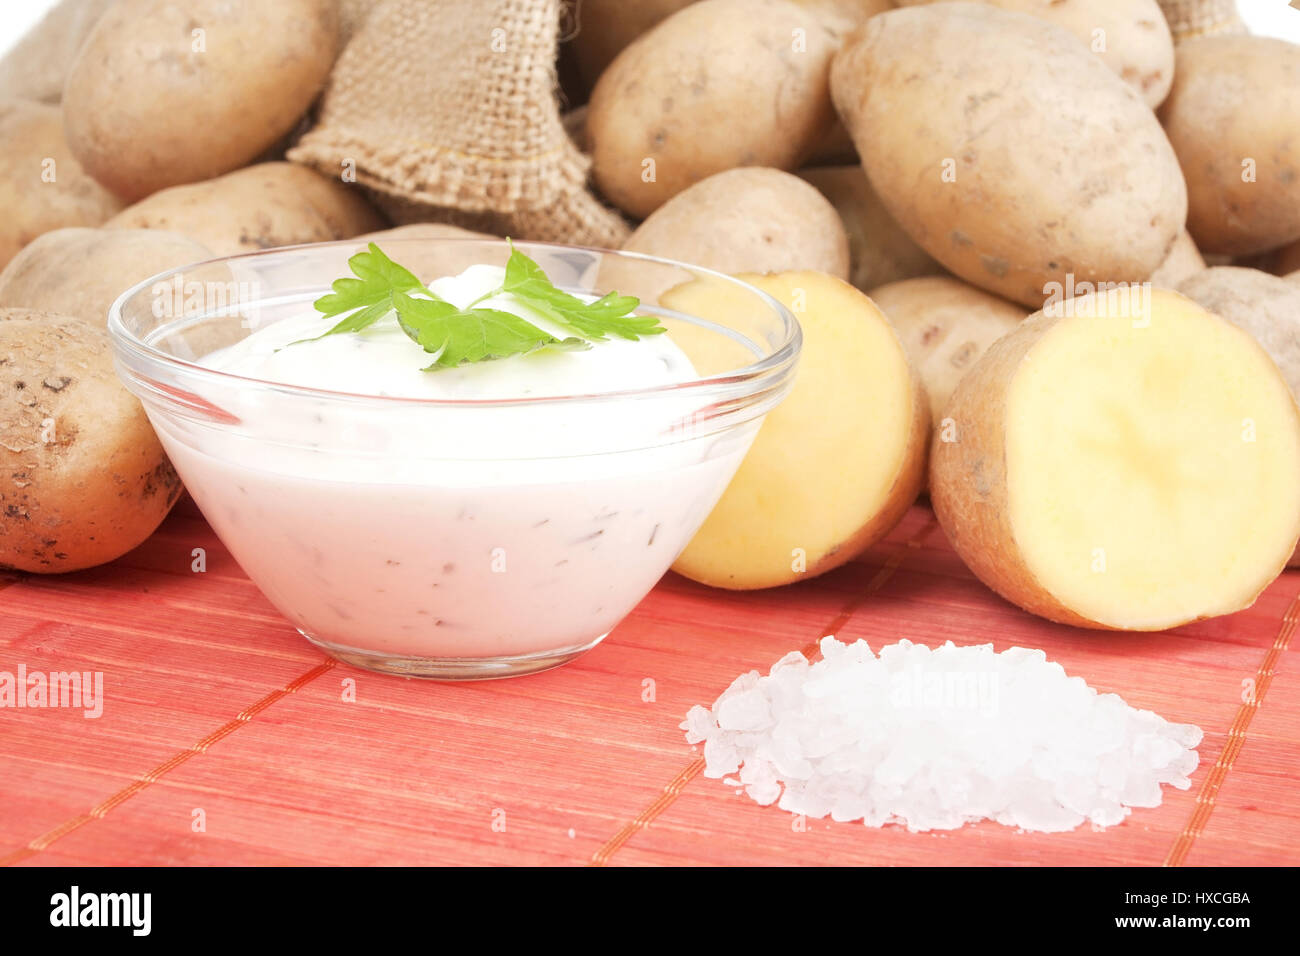 Potatoes with salt and curd, Potatoes with salt and cottage cheese |, Kartoffeln mit Salz und Quark |Potatoes with salt and cottage cheese| Stock Photo